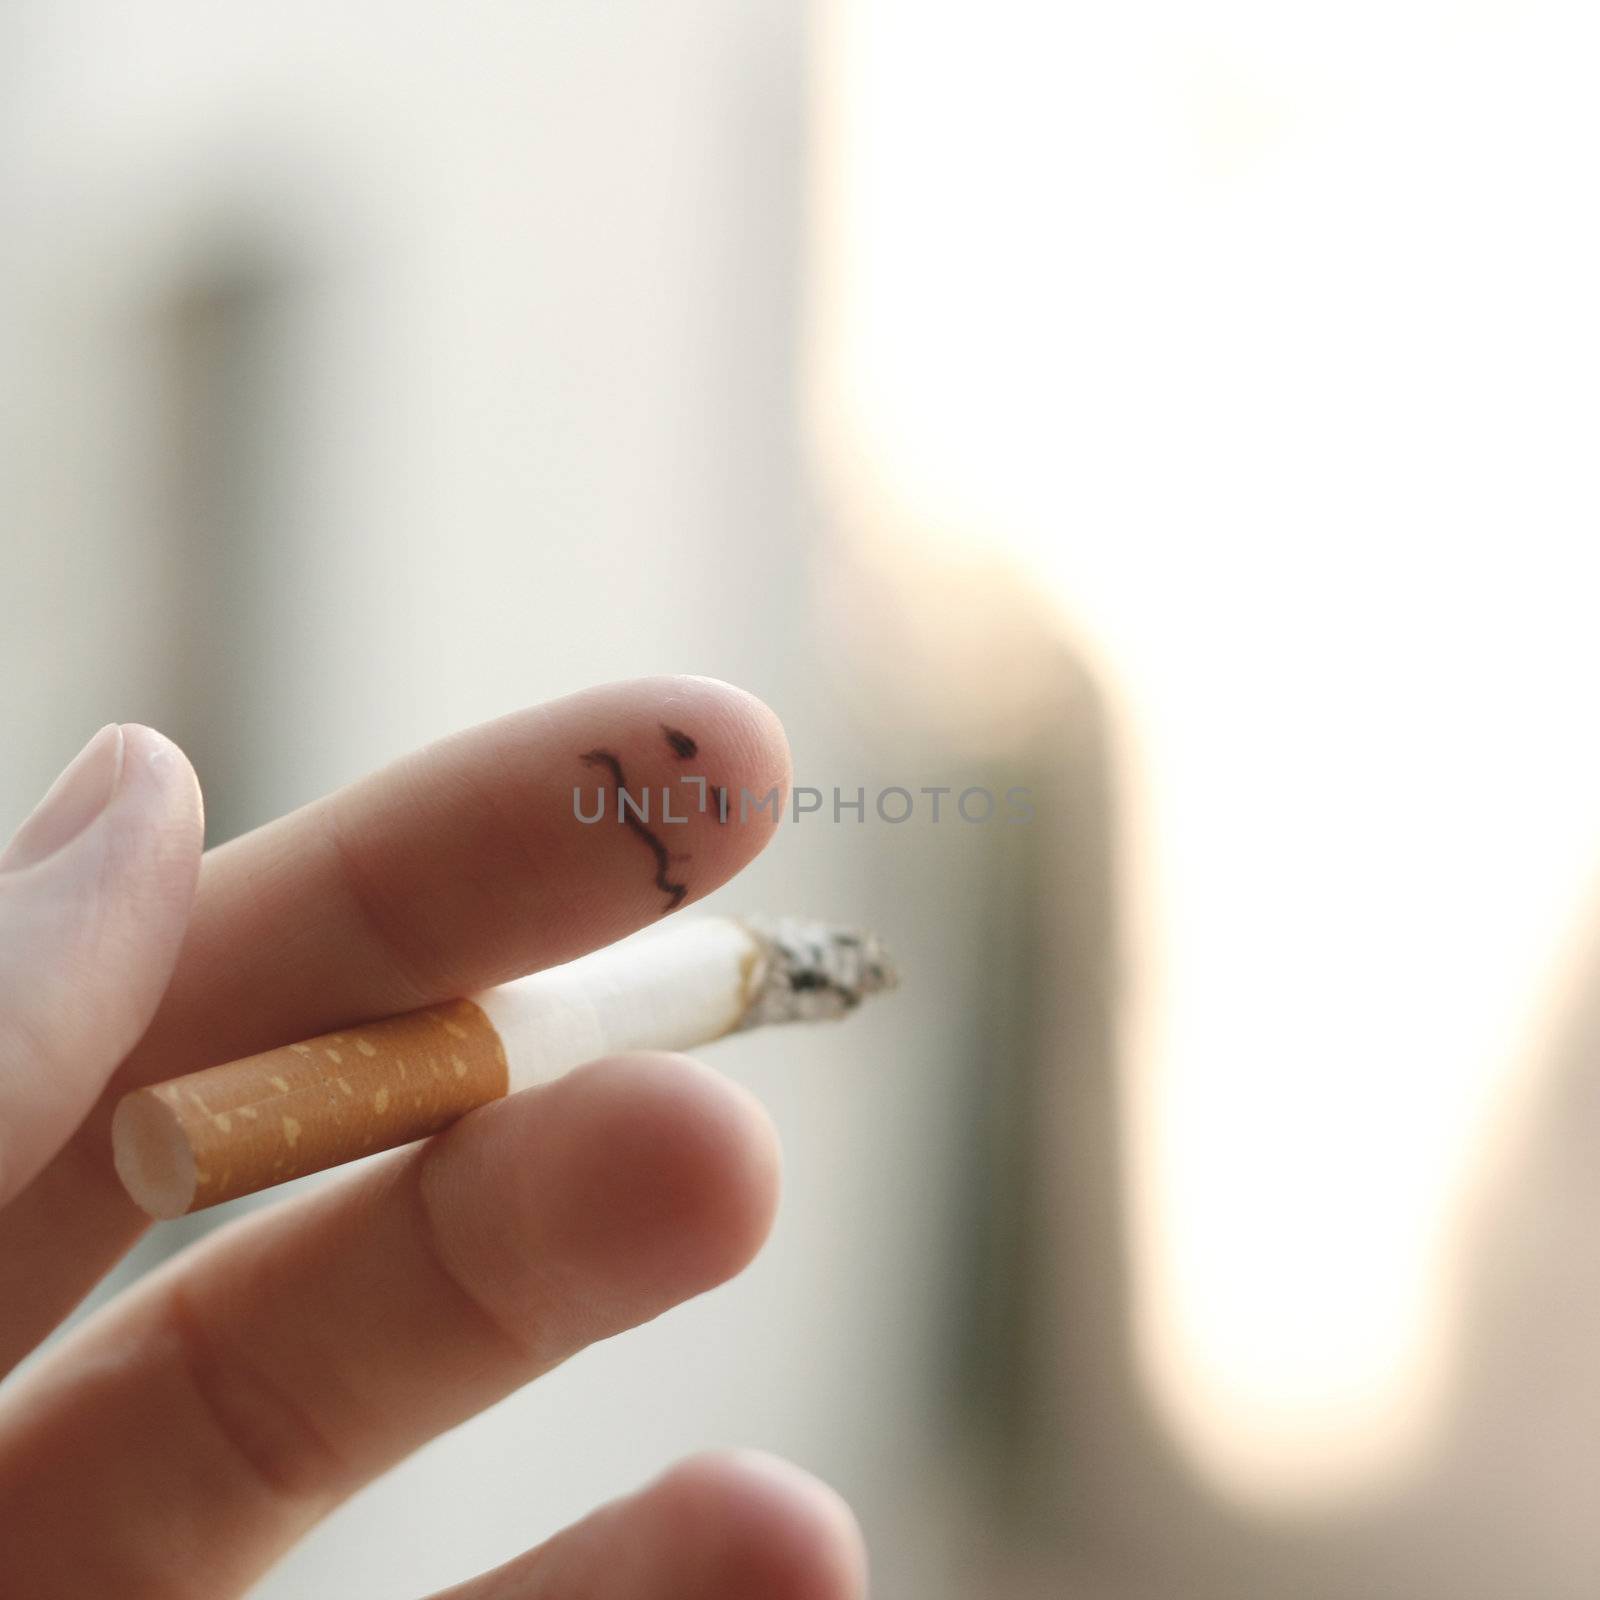 Conceptual photography about non-smoking and health